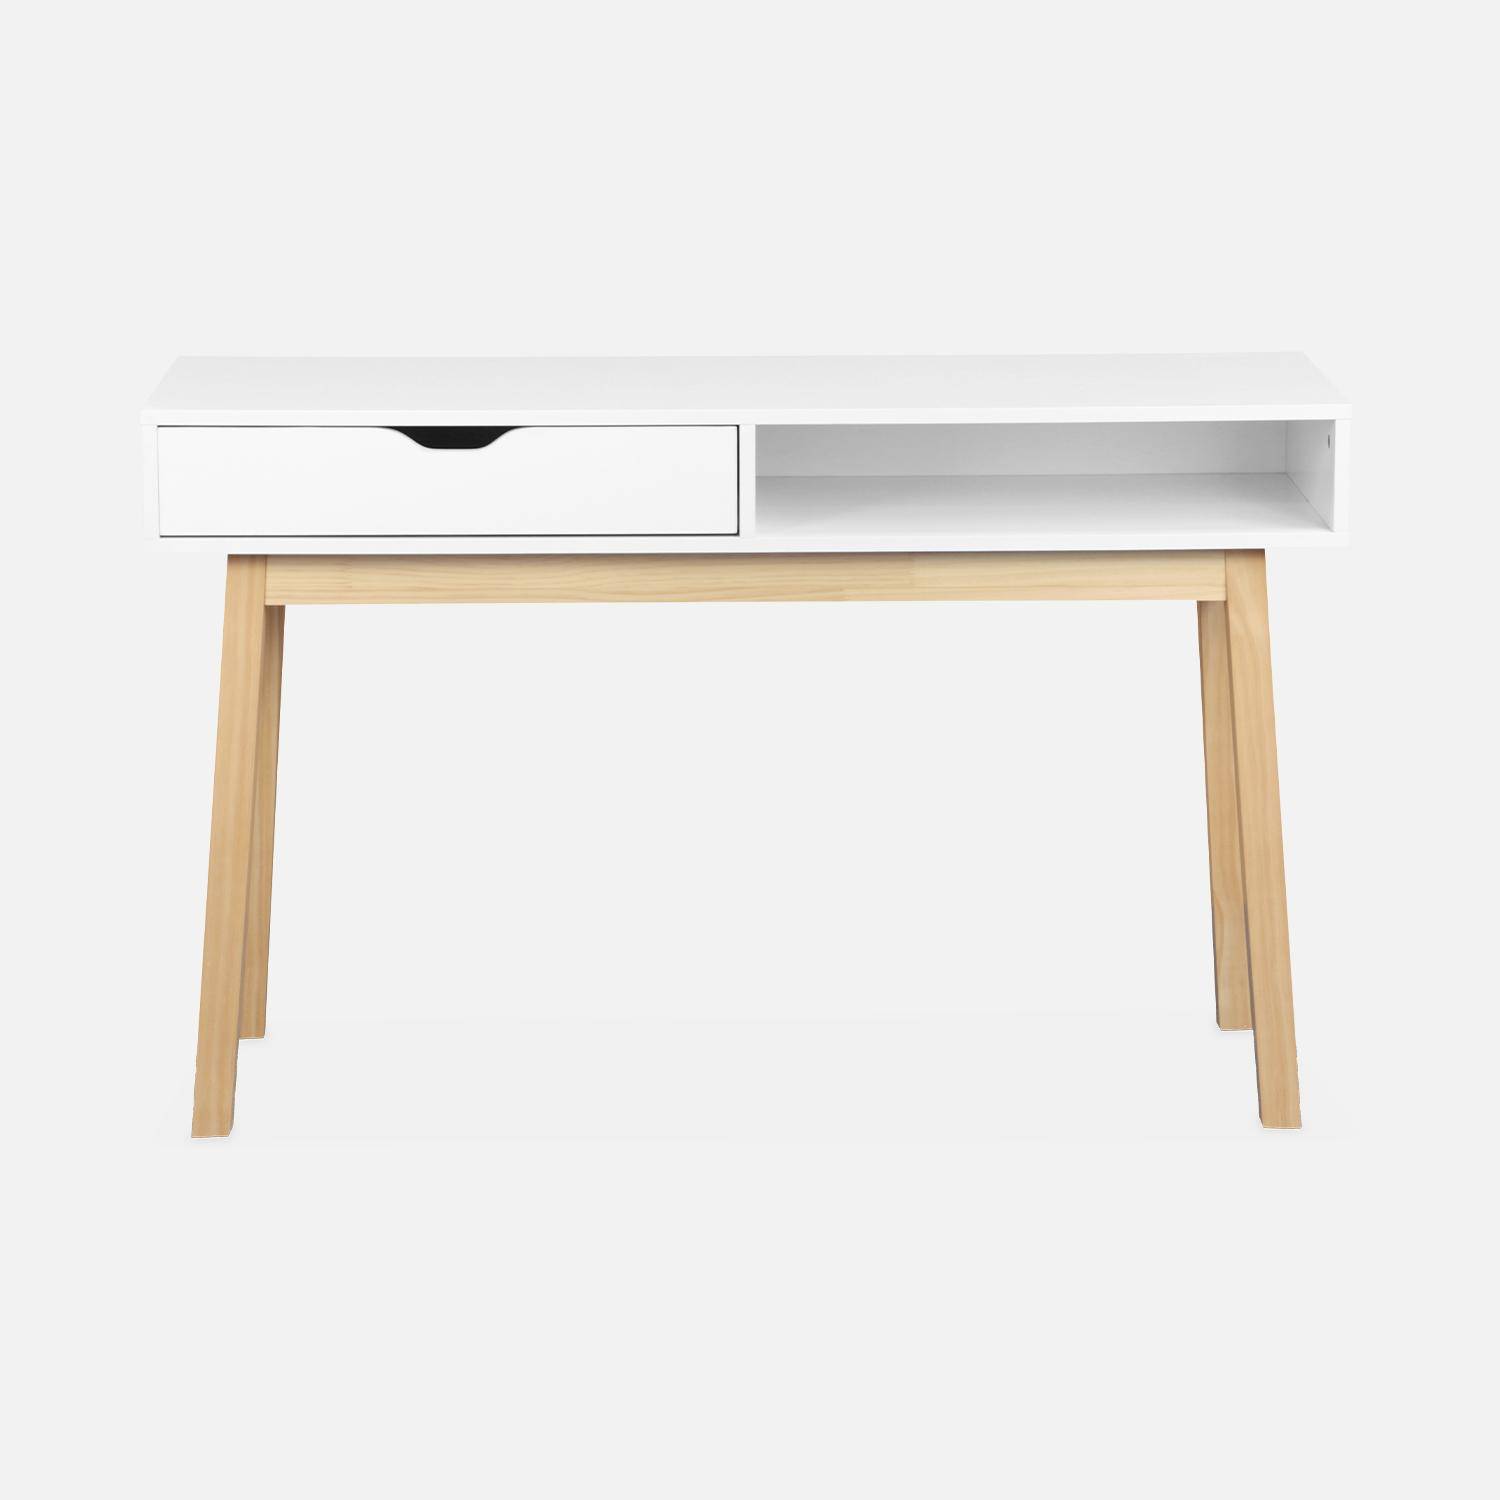 L119cm x W37cm x H74.5cm, Console with Wood Effect and Wooden Legs, 1 Drawer, white, ,sweeek,Photo4